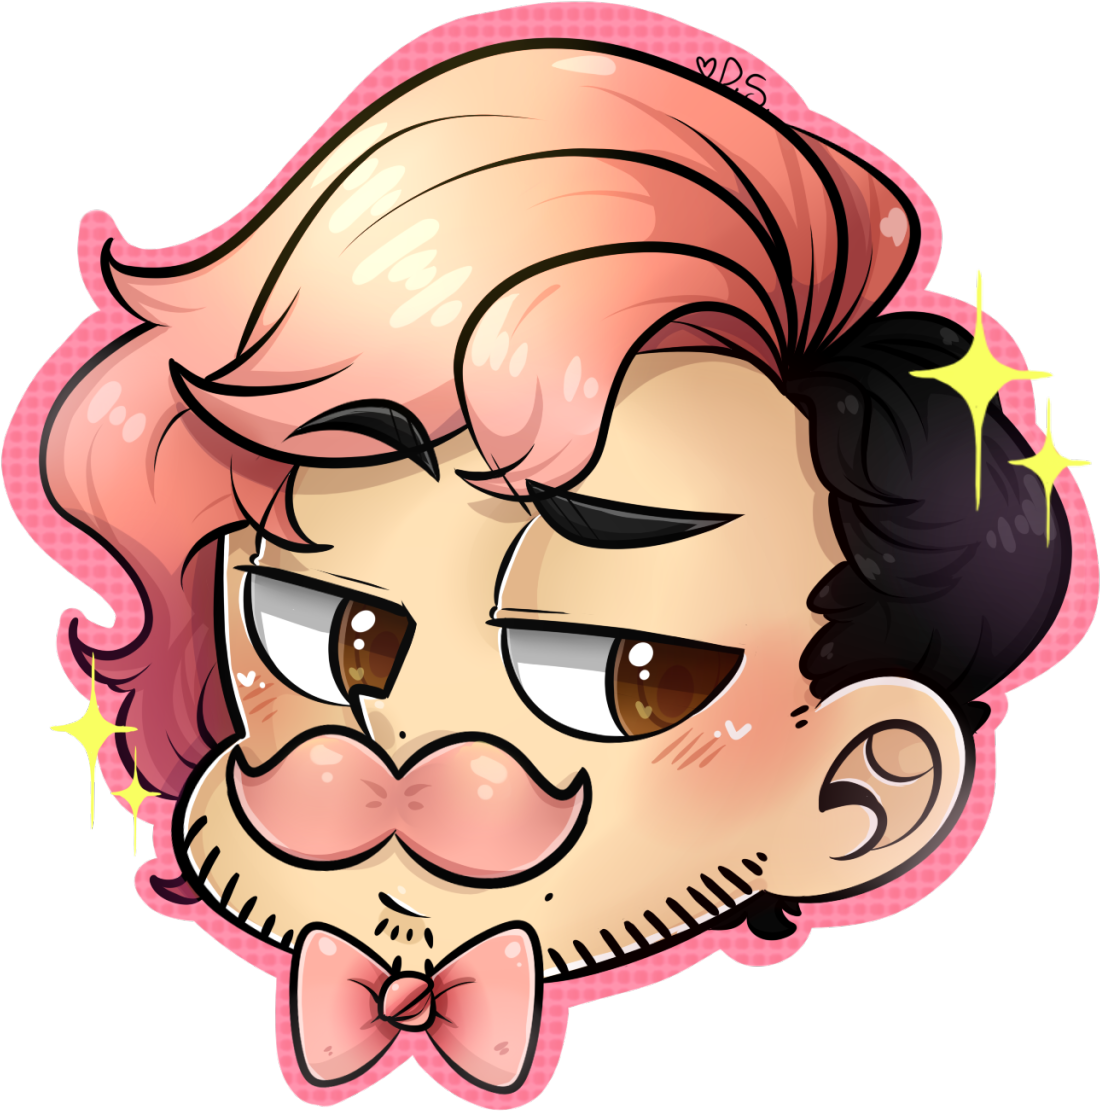 Download and share clipart about Markiplier Fan Art, Find more high quality...